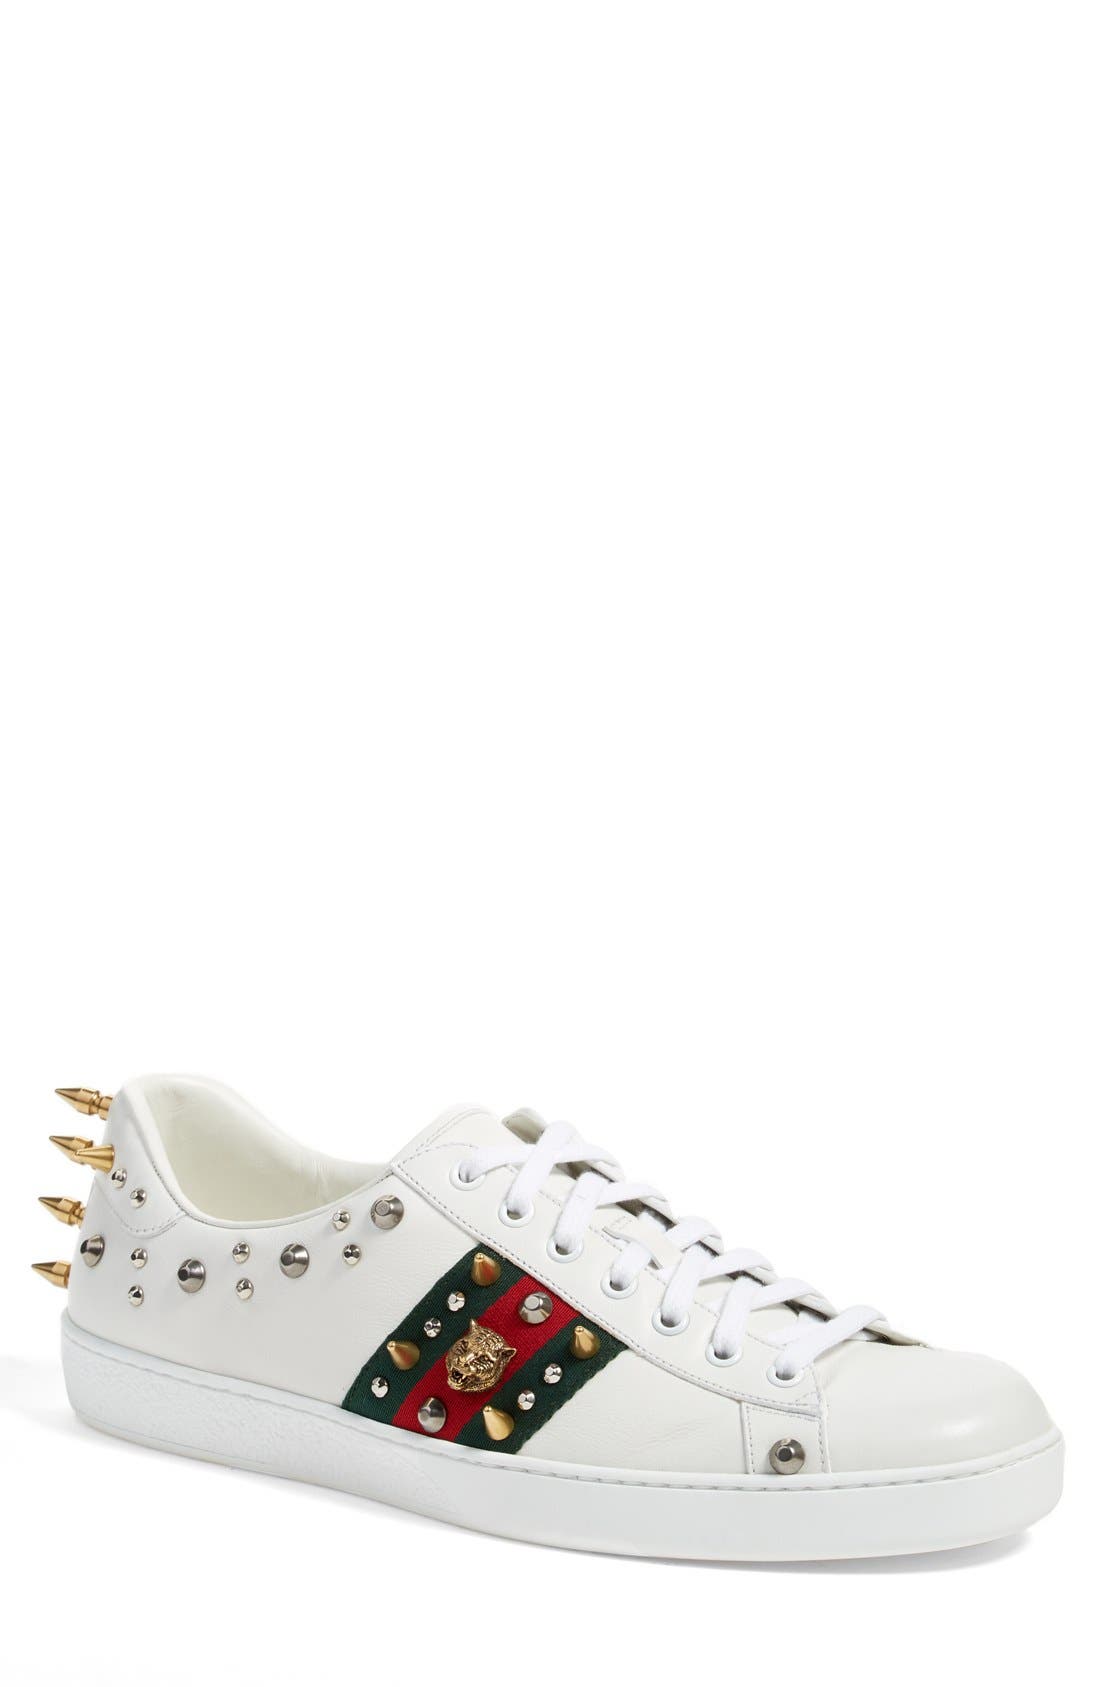 Gucci 'New Ace Punk' Studded Sneaker 